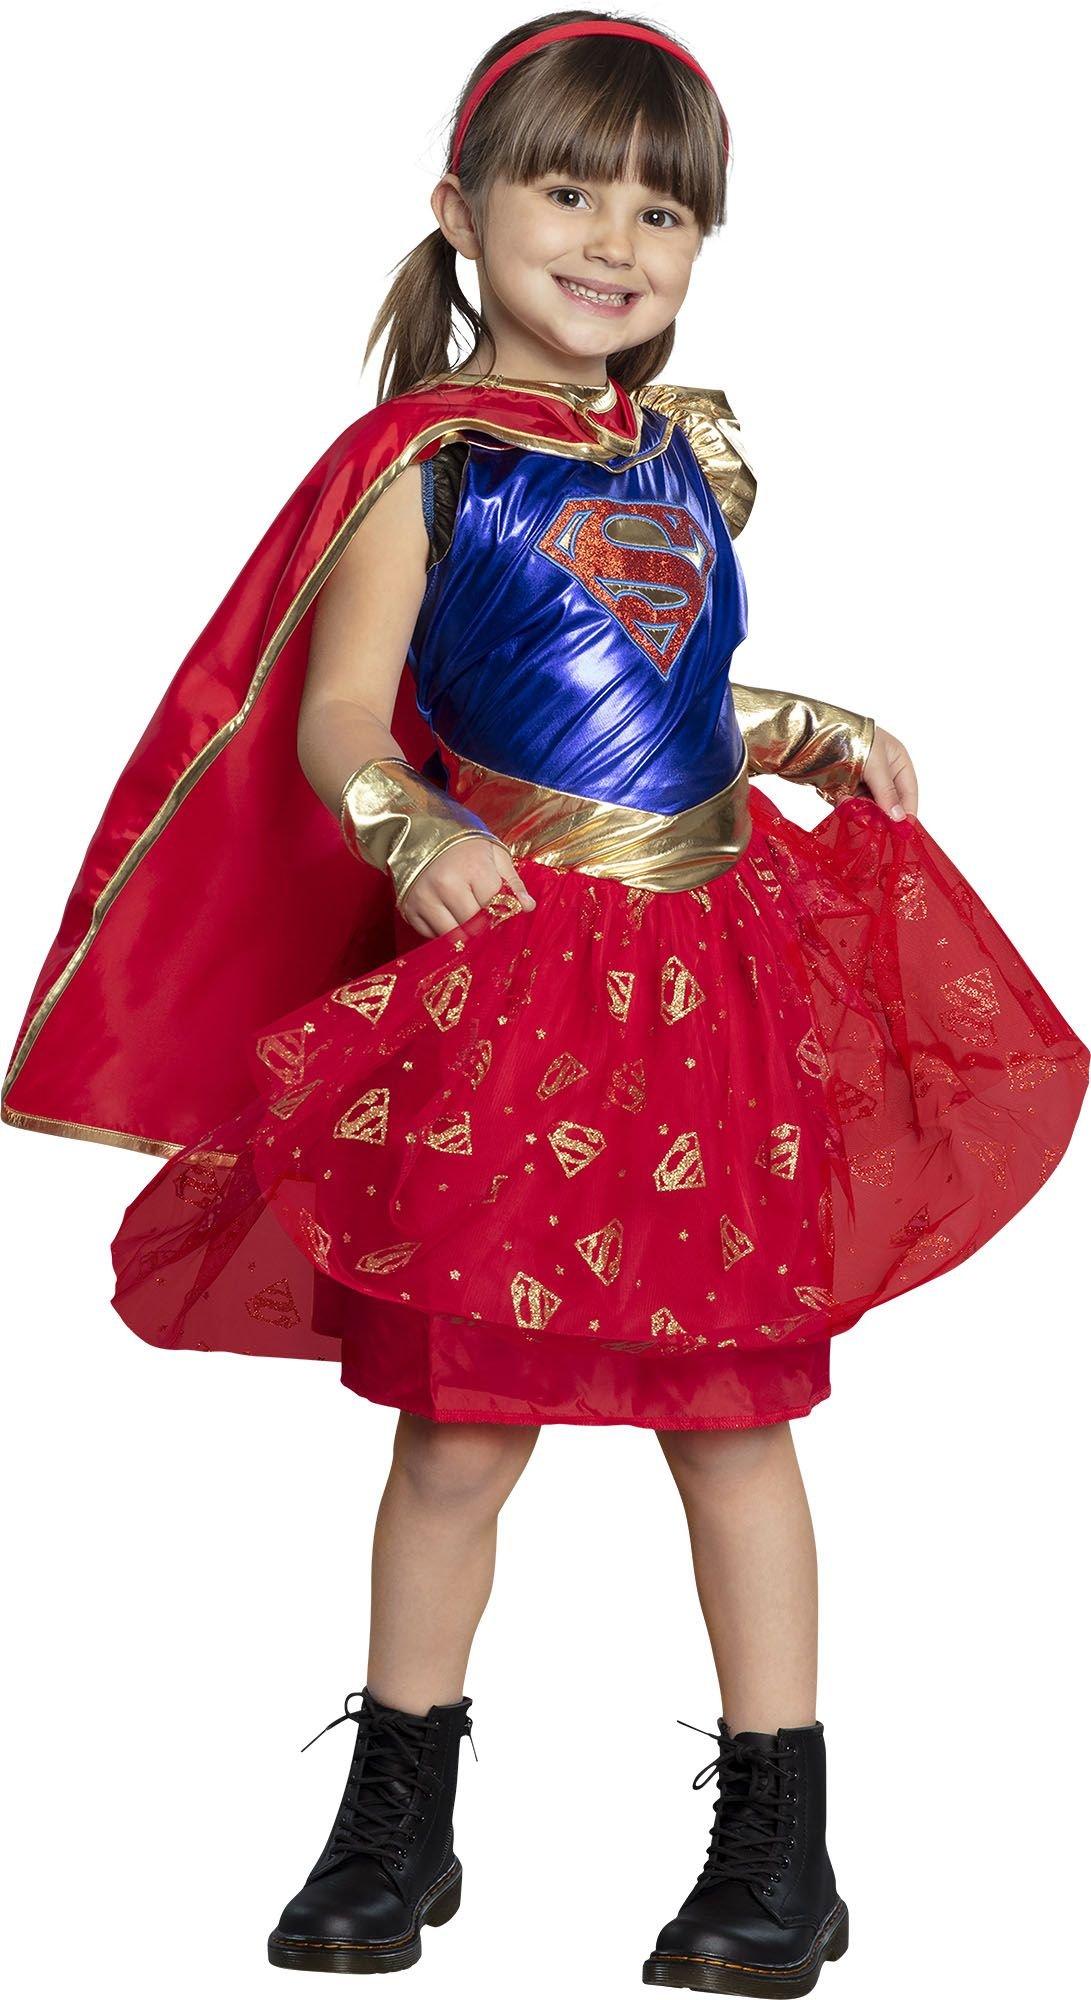 Supergirl Costume for Kids | Party City